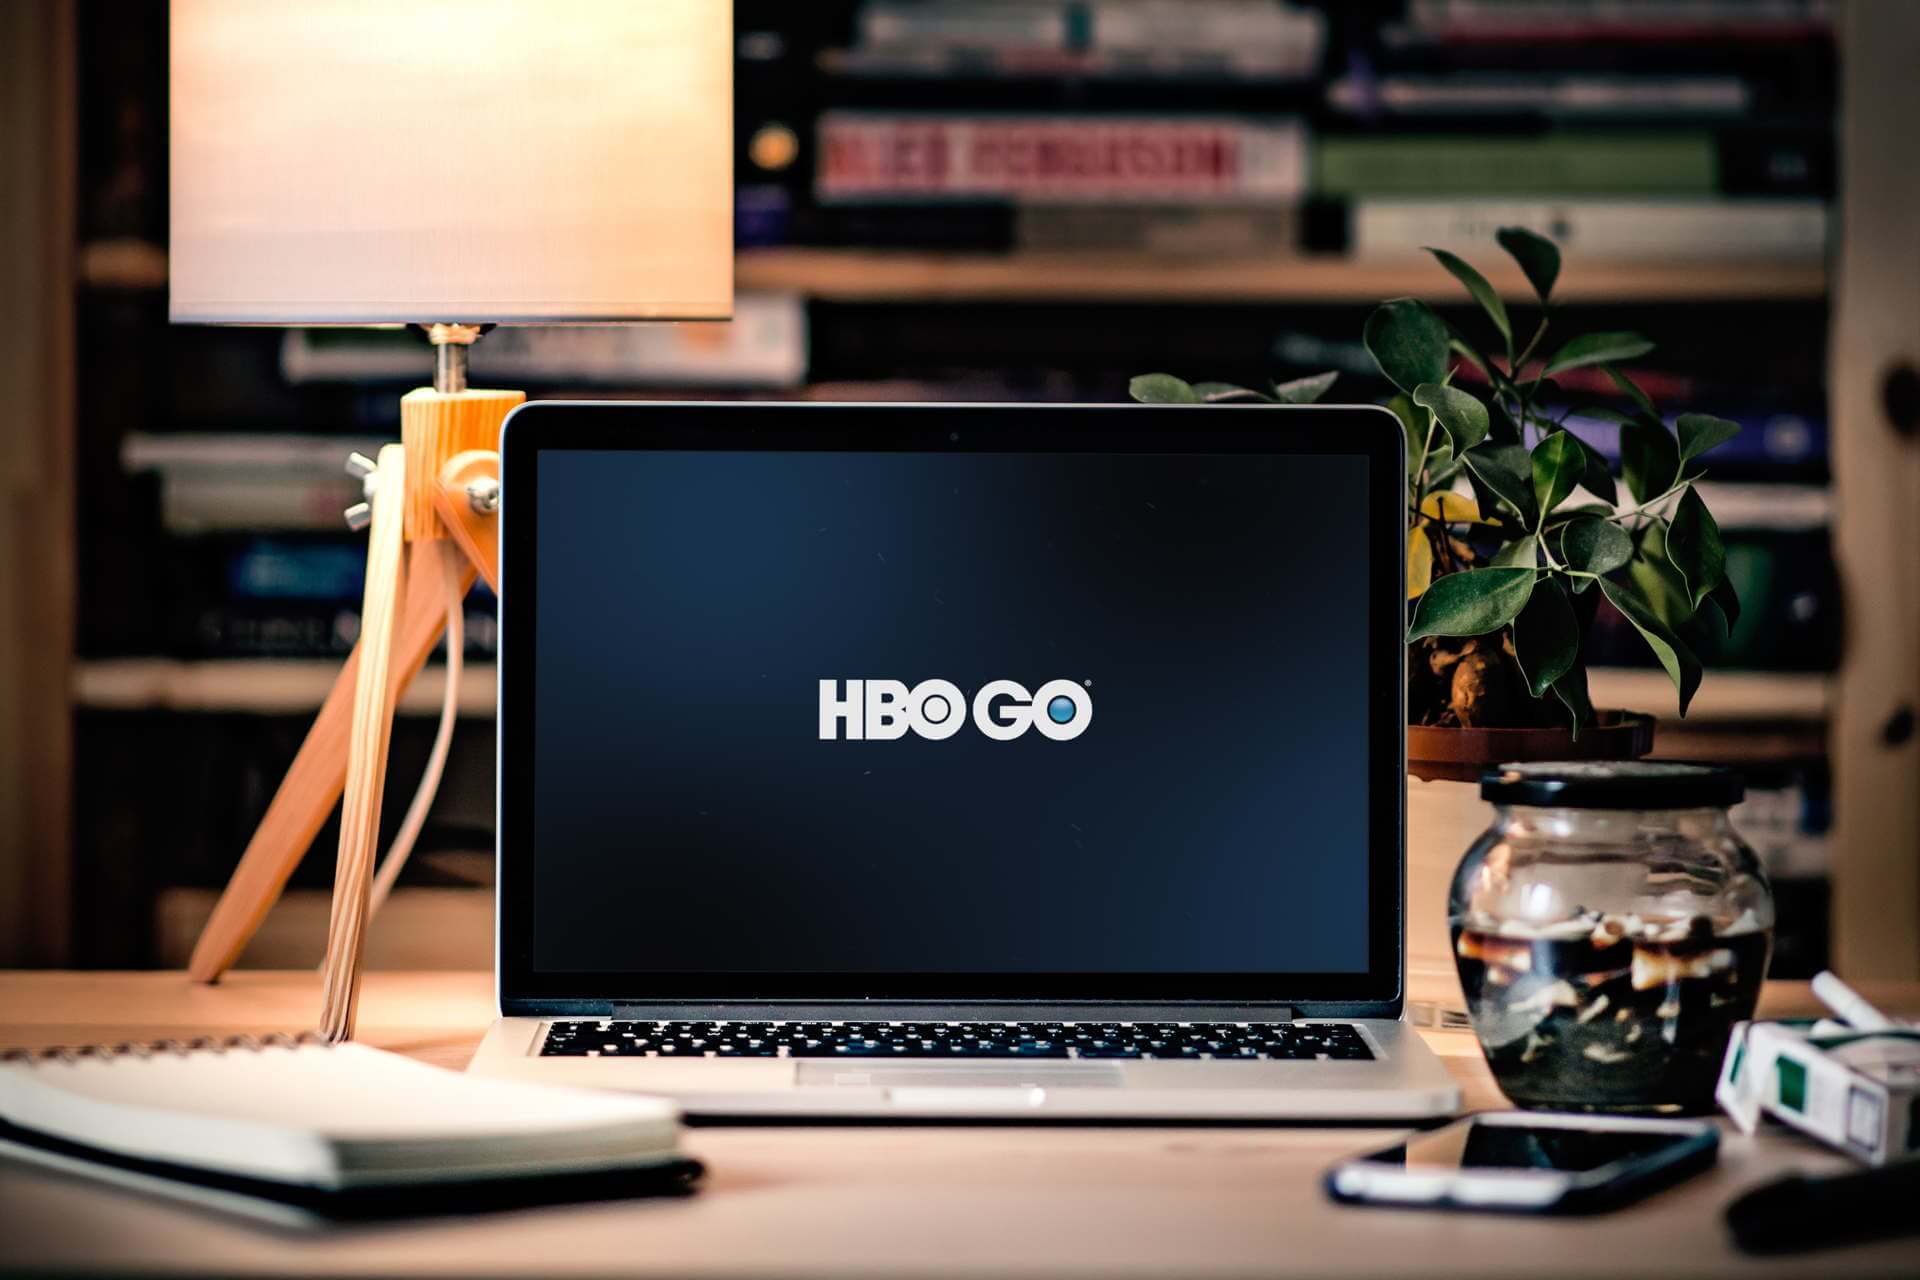 HBO Go doesn't let me sign in